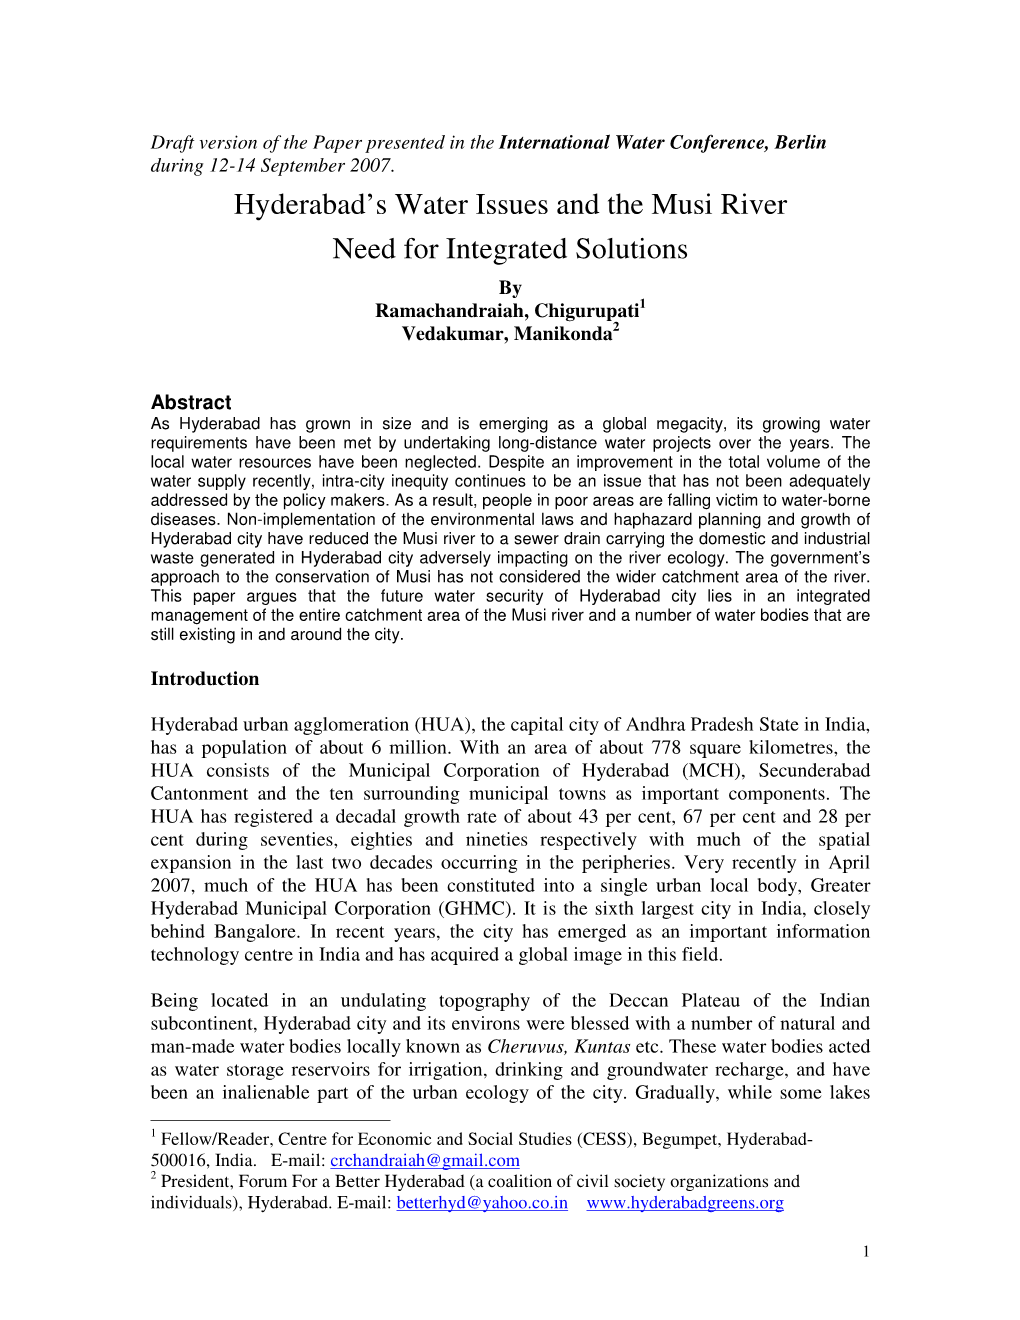 Hyderabad's Water Issues and the Musi River Need